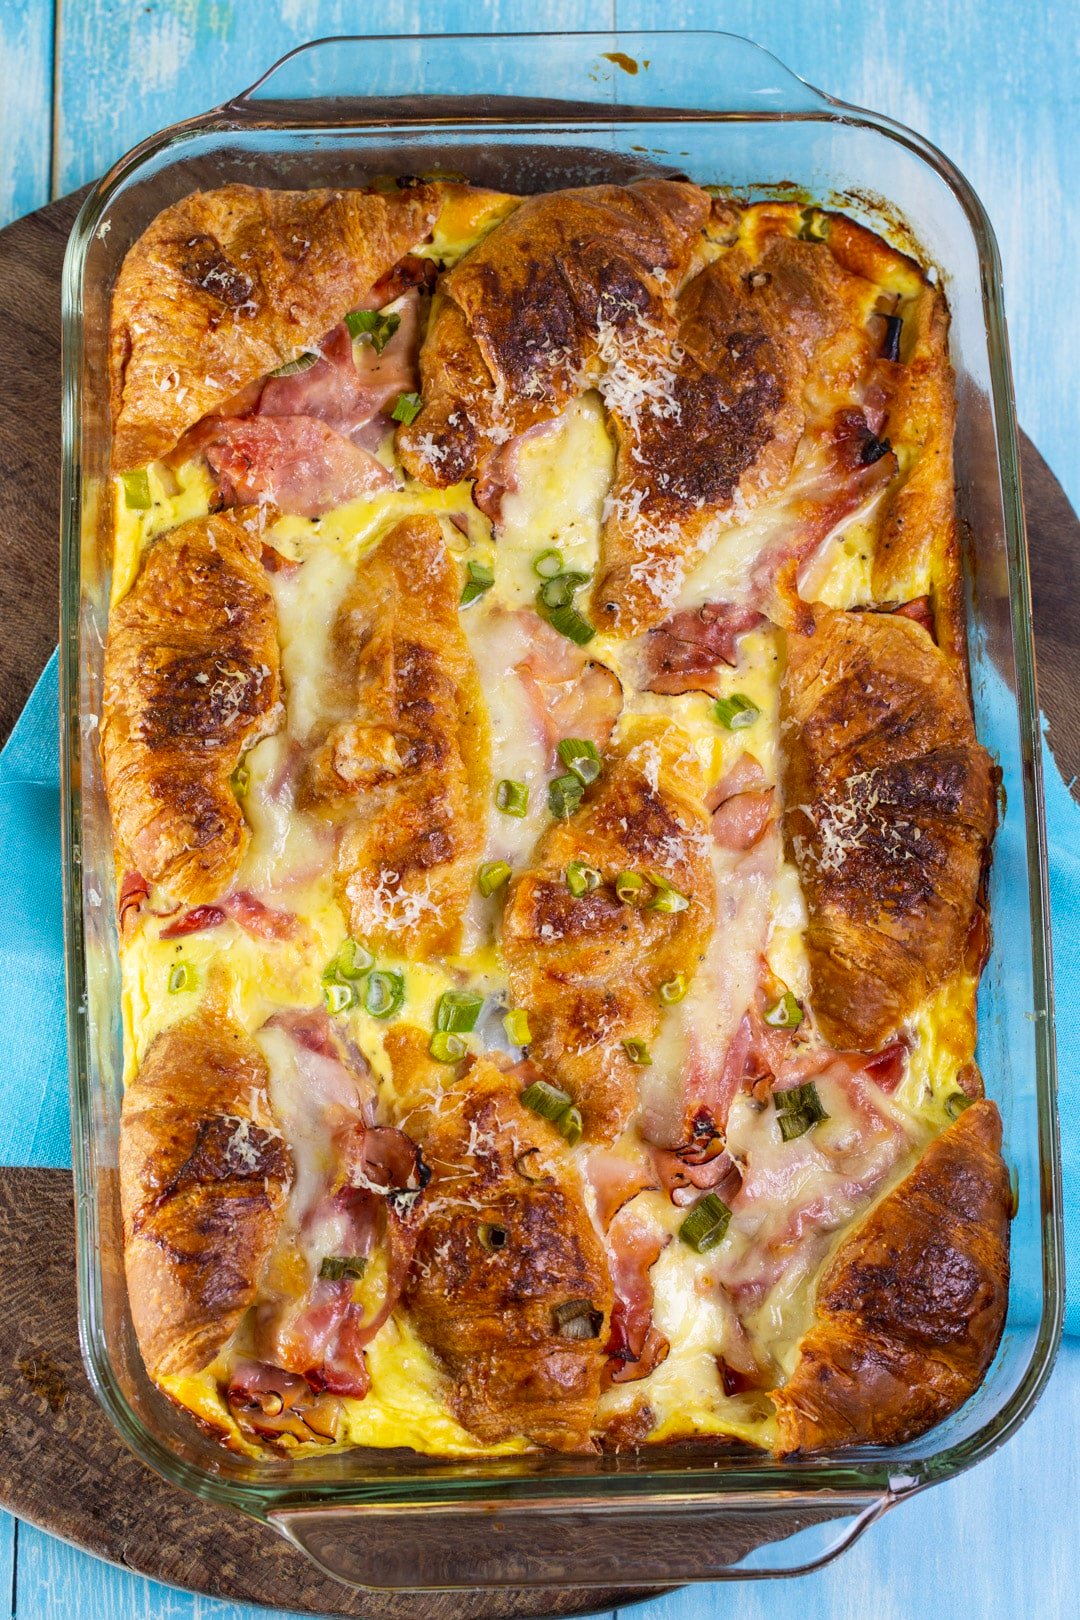 Stuffed Ham and Cheese Croissant Casserole in baking dish.